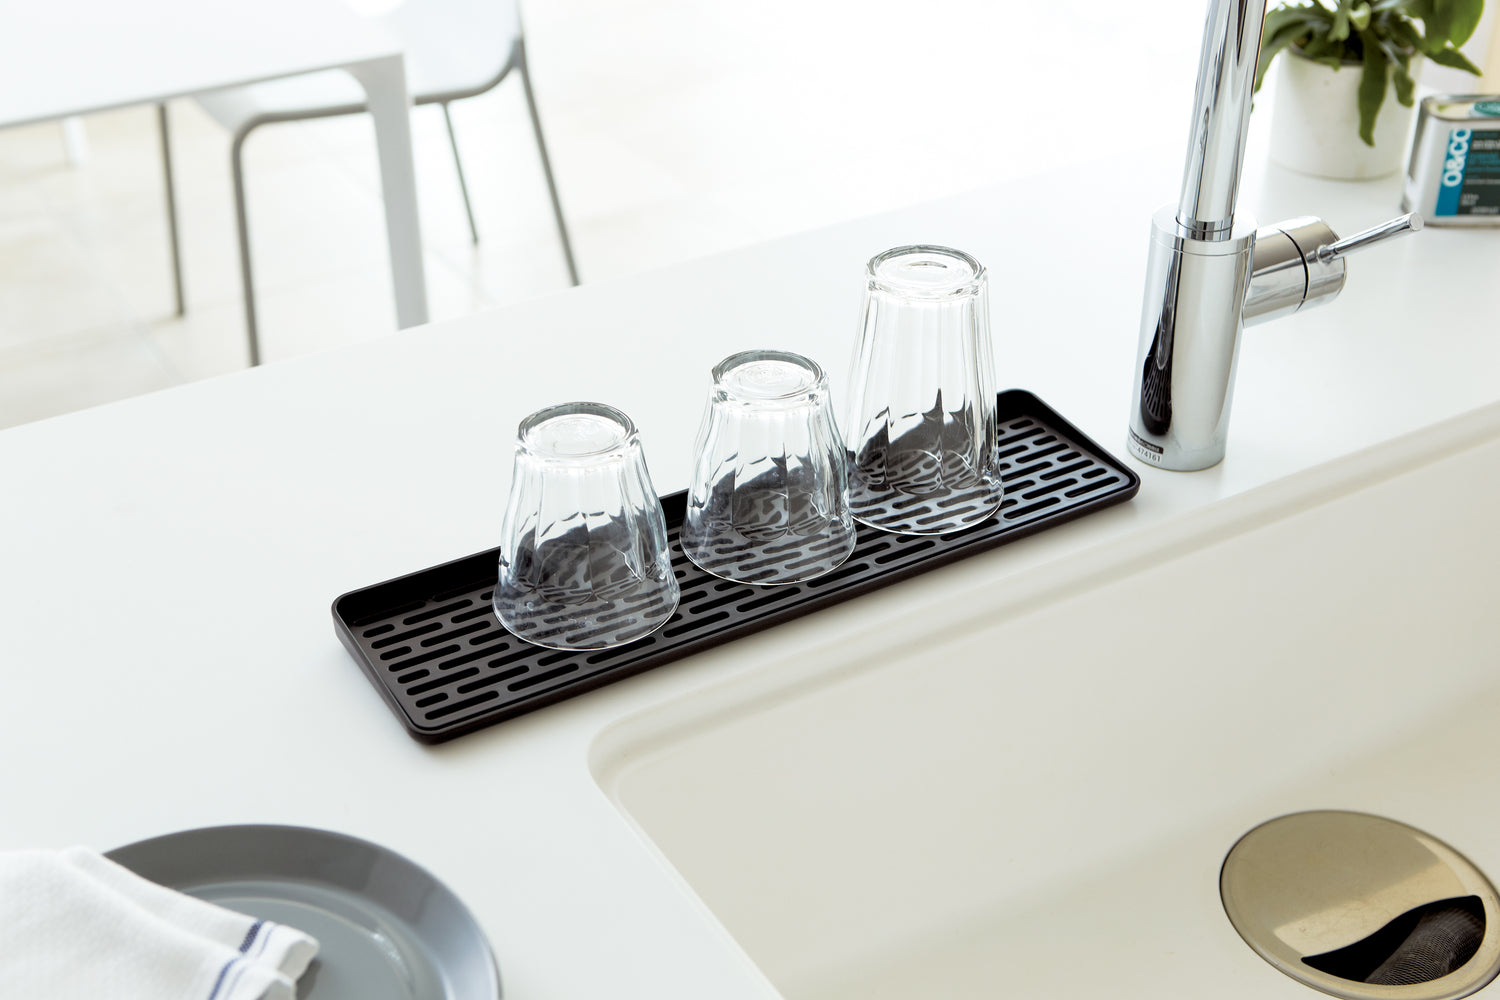 View 10 - Aerial view of Black Sink Drainer Tray holding glasses on kitchen sink counter by Yamazaki Home.